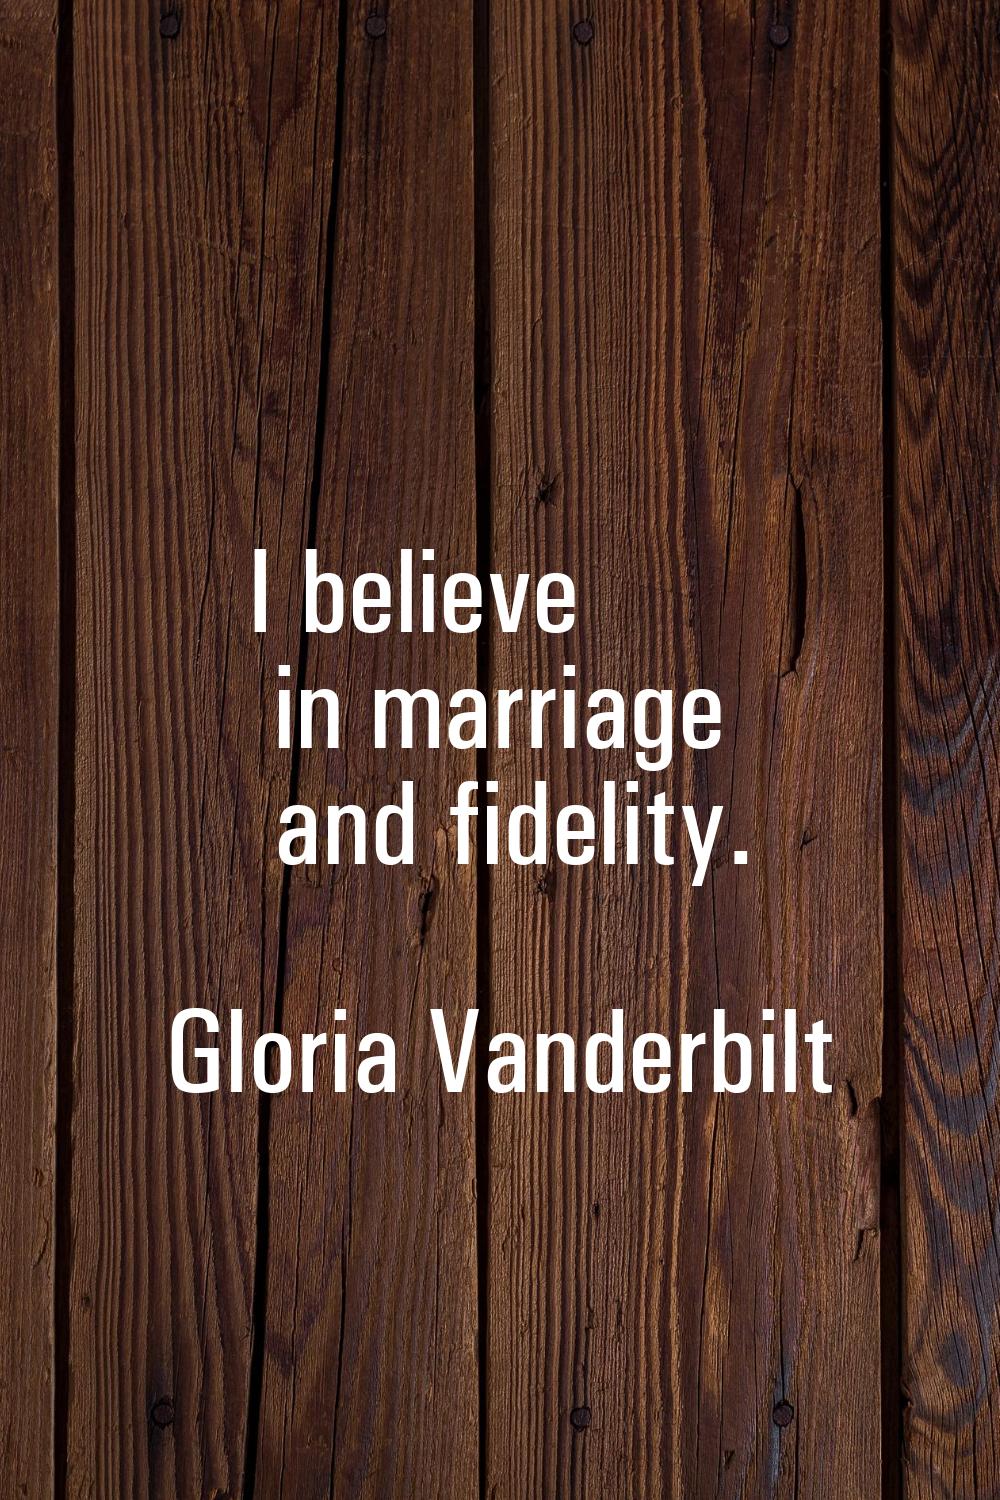 I believe in marriage and fidelity.